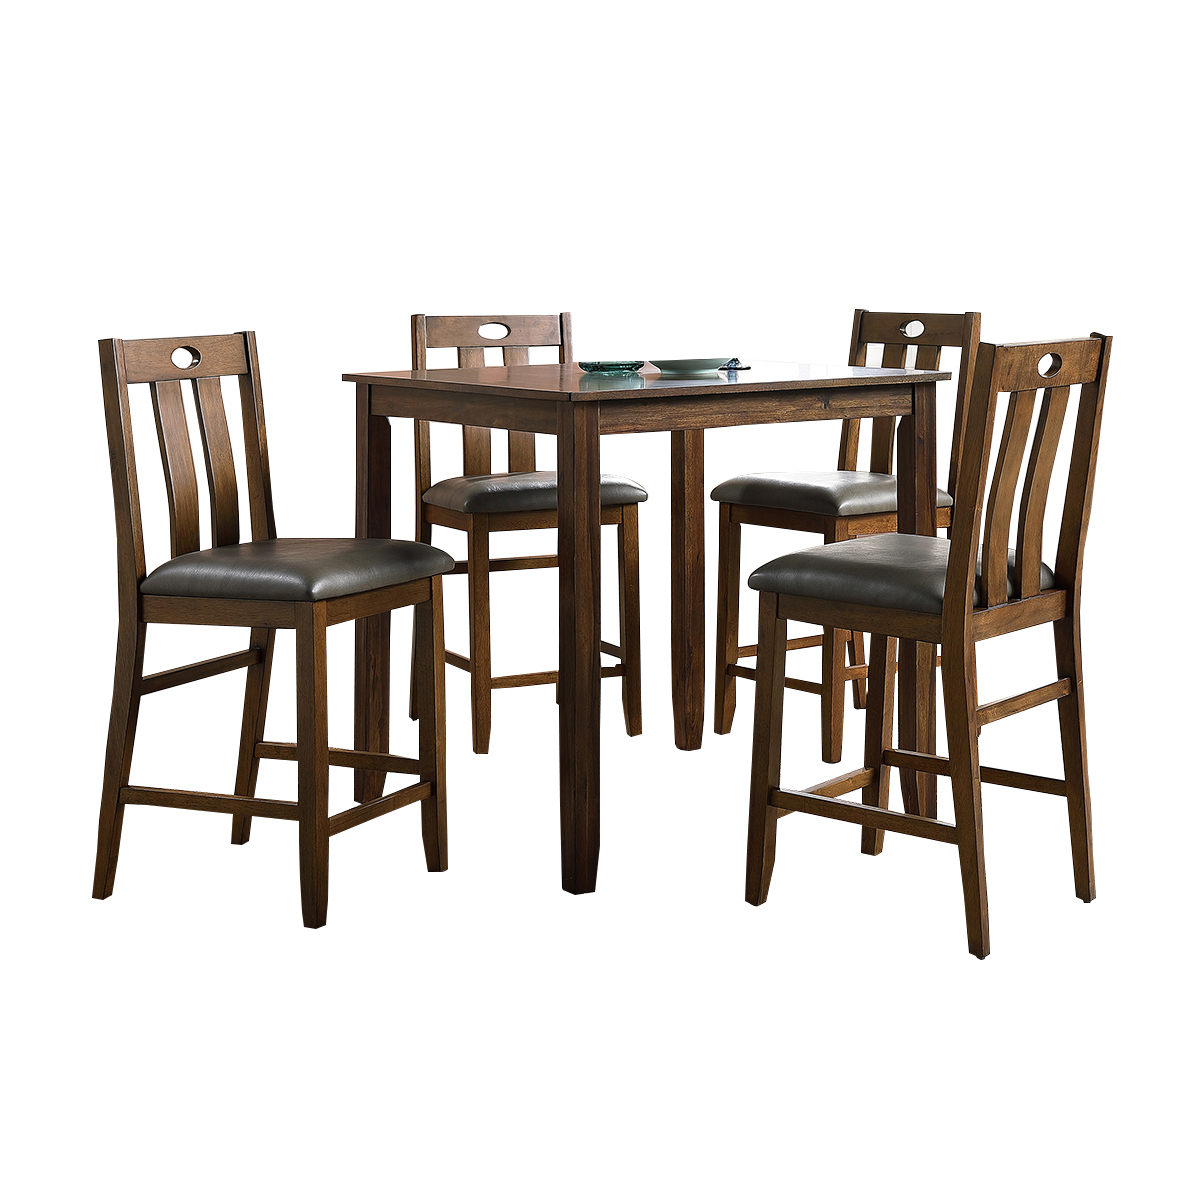 5 Piece Counter Height Wooden Dining Set With Padded Seat, Brown And Gray- Saltoro Sherpi